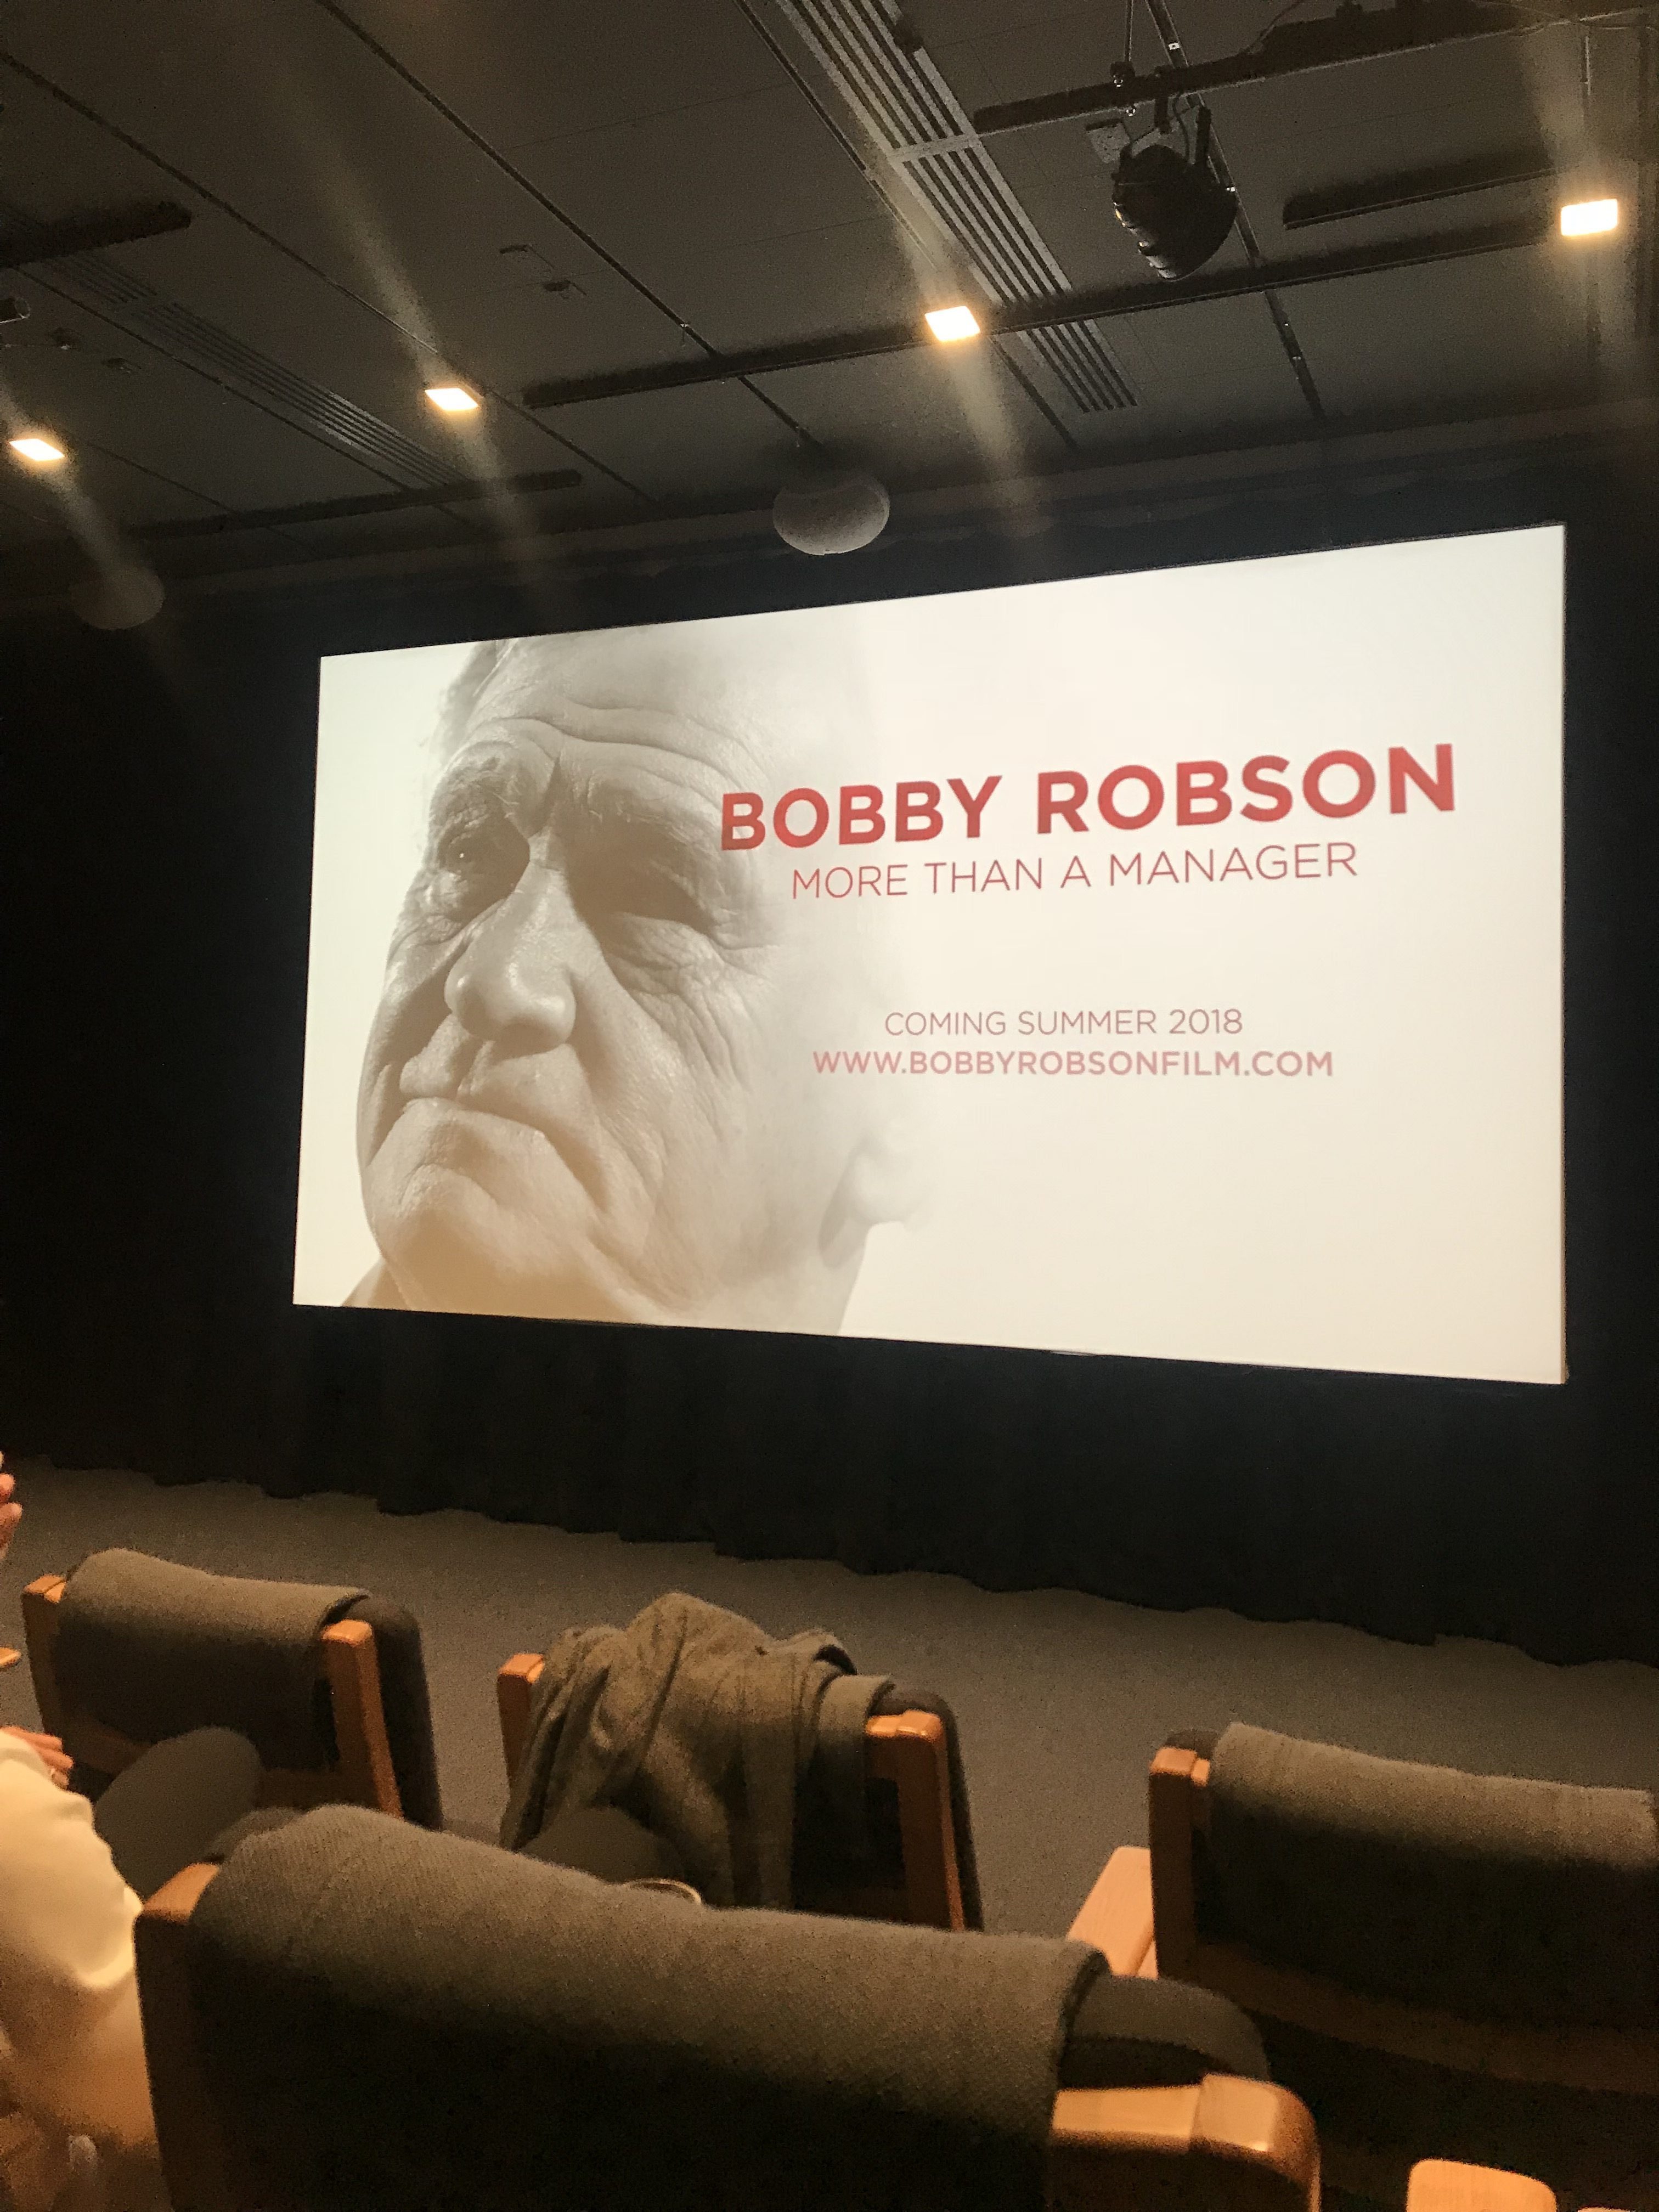 Bobby Robson Film - More than a Manager | Football Documentary about Sir Bobby's life at Barcelona FC, PSV, the England Manager role, and returning to Newcastle United | Elle Blonde Luxury Lifestyle Destination Blog